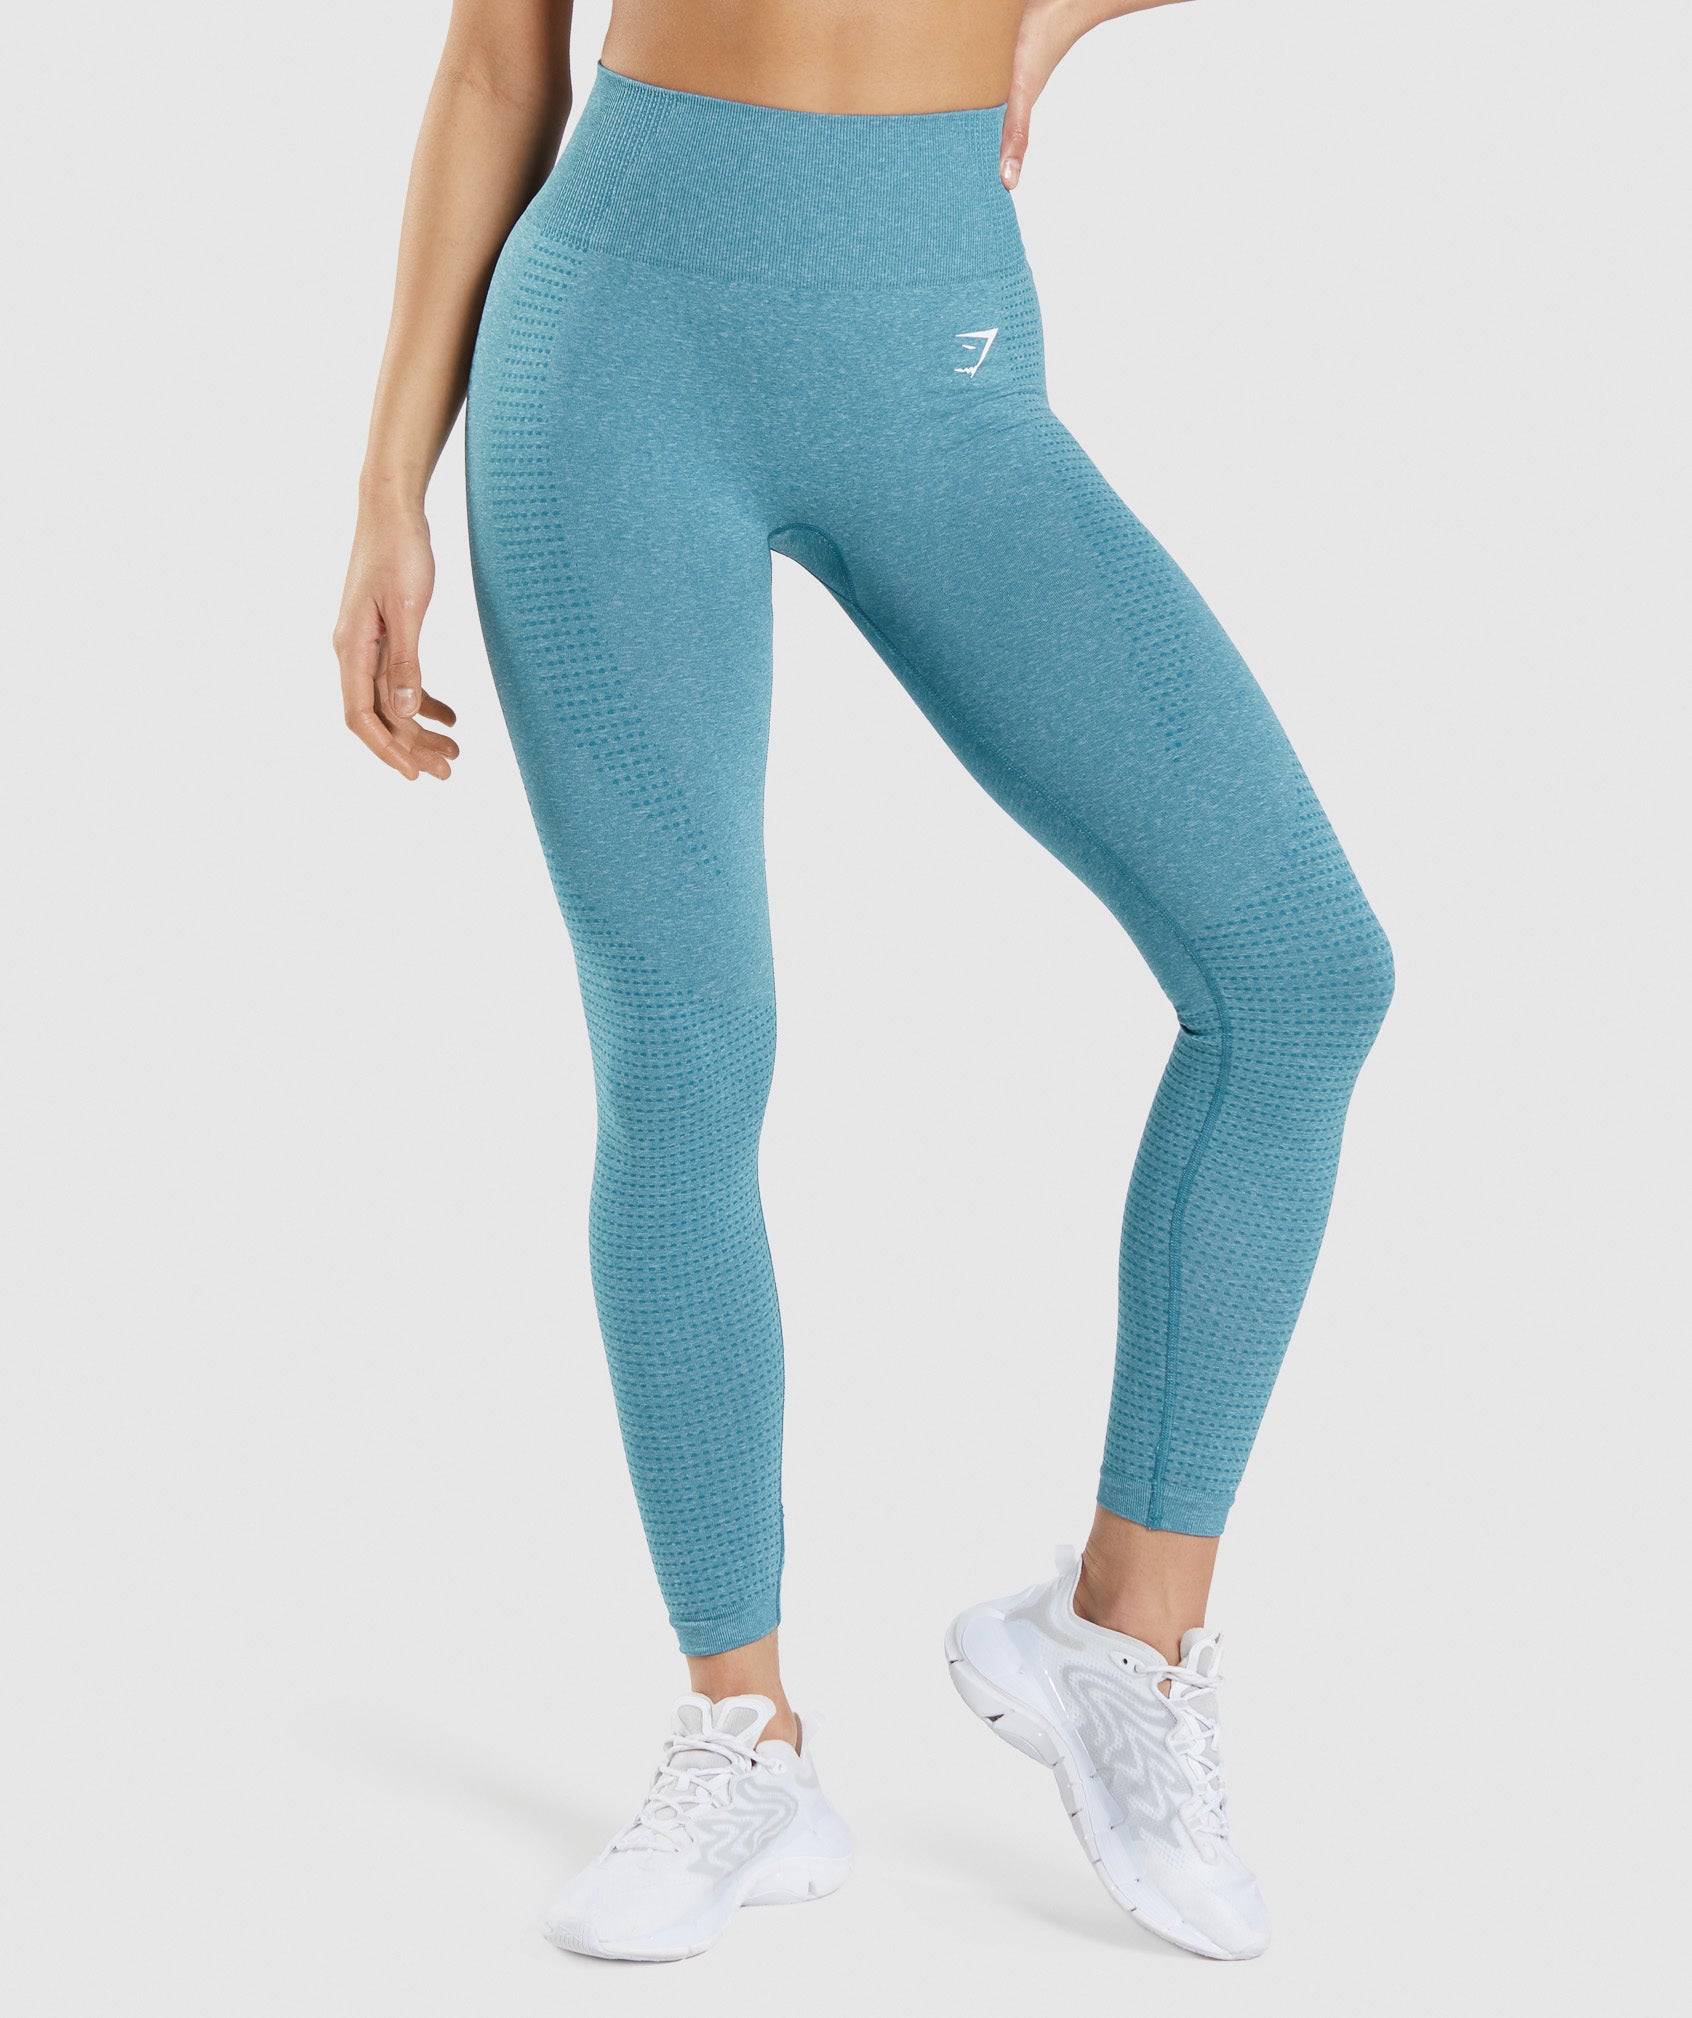 Gymshark Flex Leggings Charcoal Marl Turquoise Teal Size XS Contour  Seamless